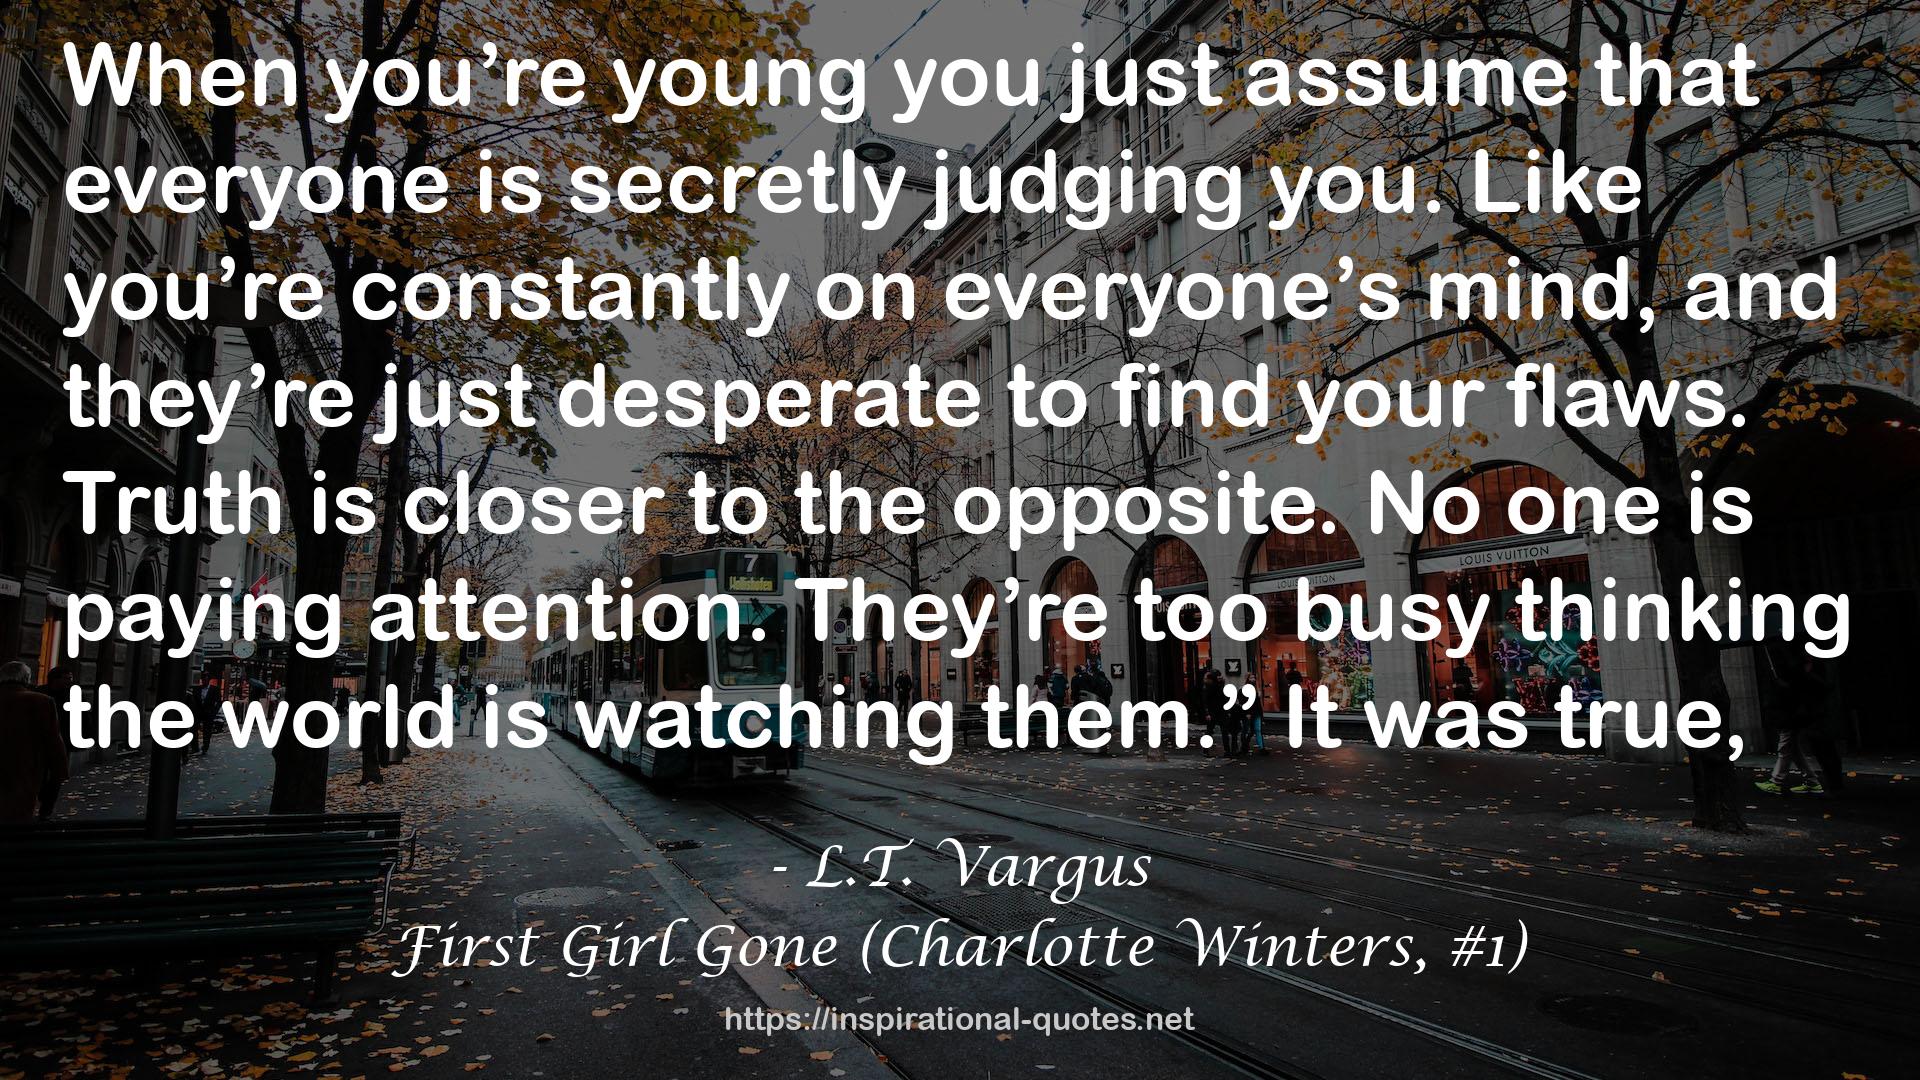 First Girl Gone (Charlotte Winters, #1) QUOTES